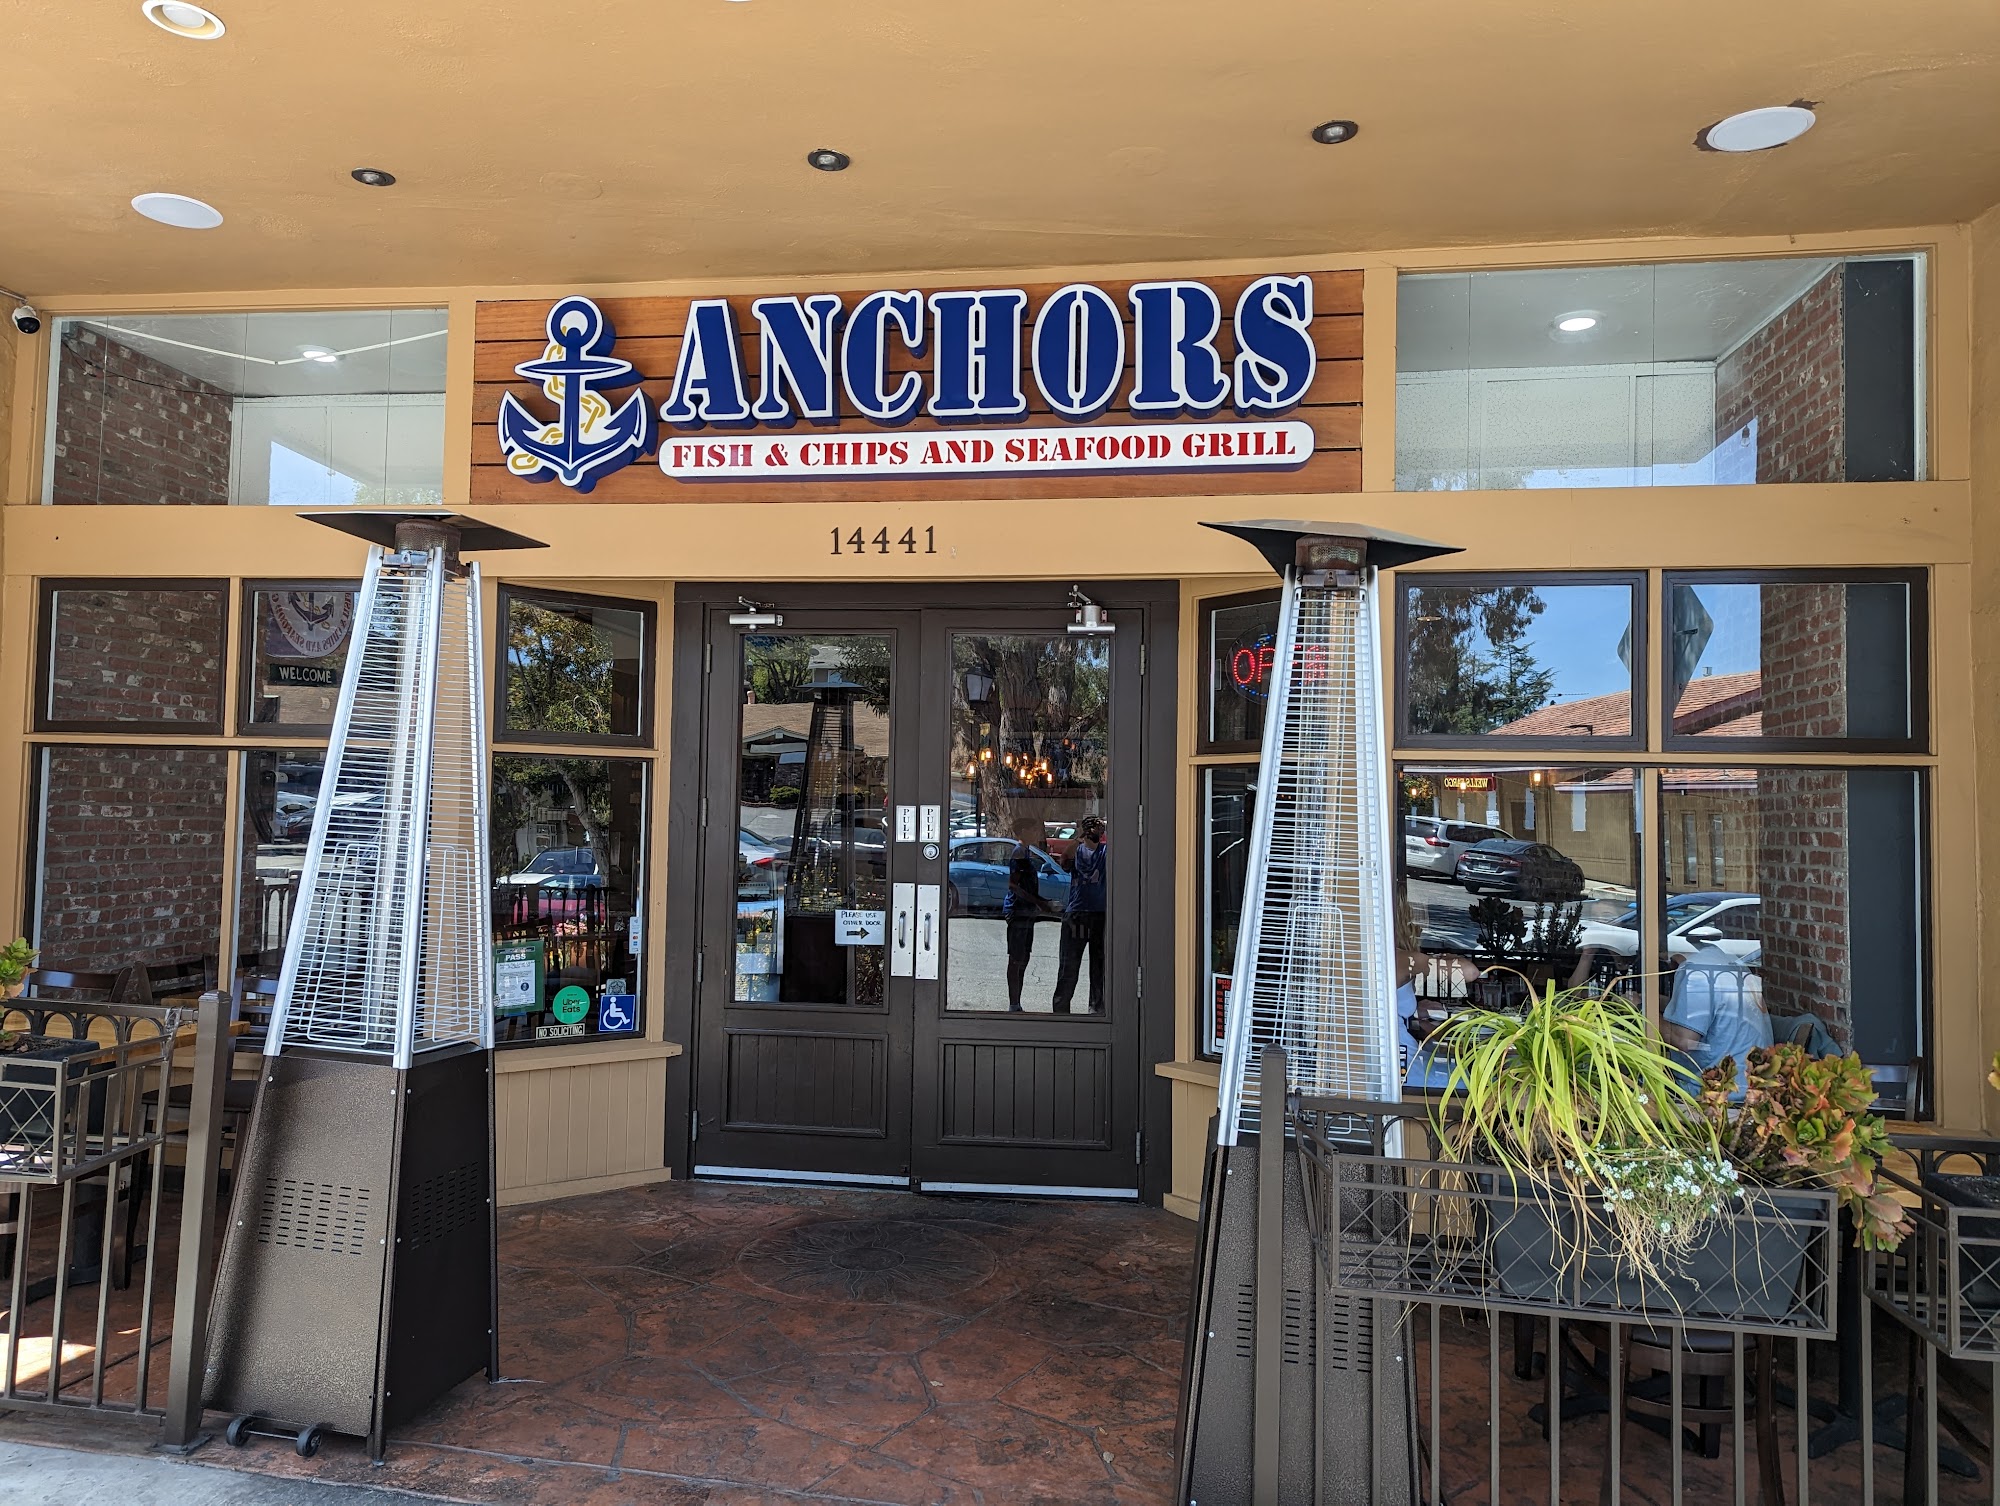 Anchors Fish & Chips And Seafood Grill